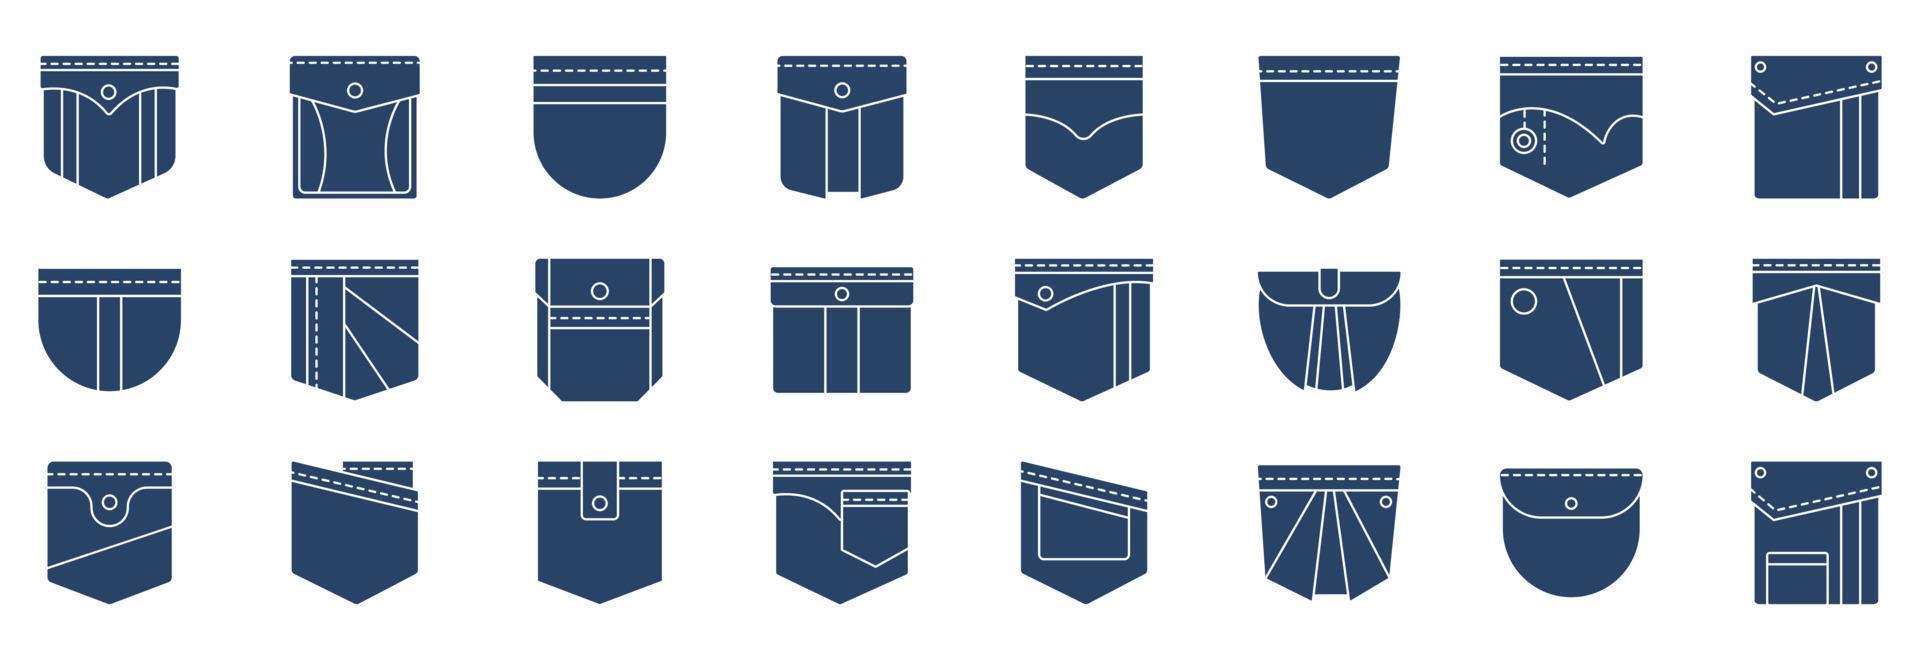 Collection of icons related to Pockets, including icons like Cloth, design, jeans and more. vector illustrations, Pixel Perfect set